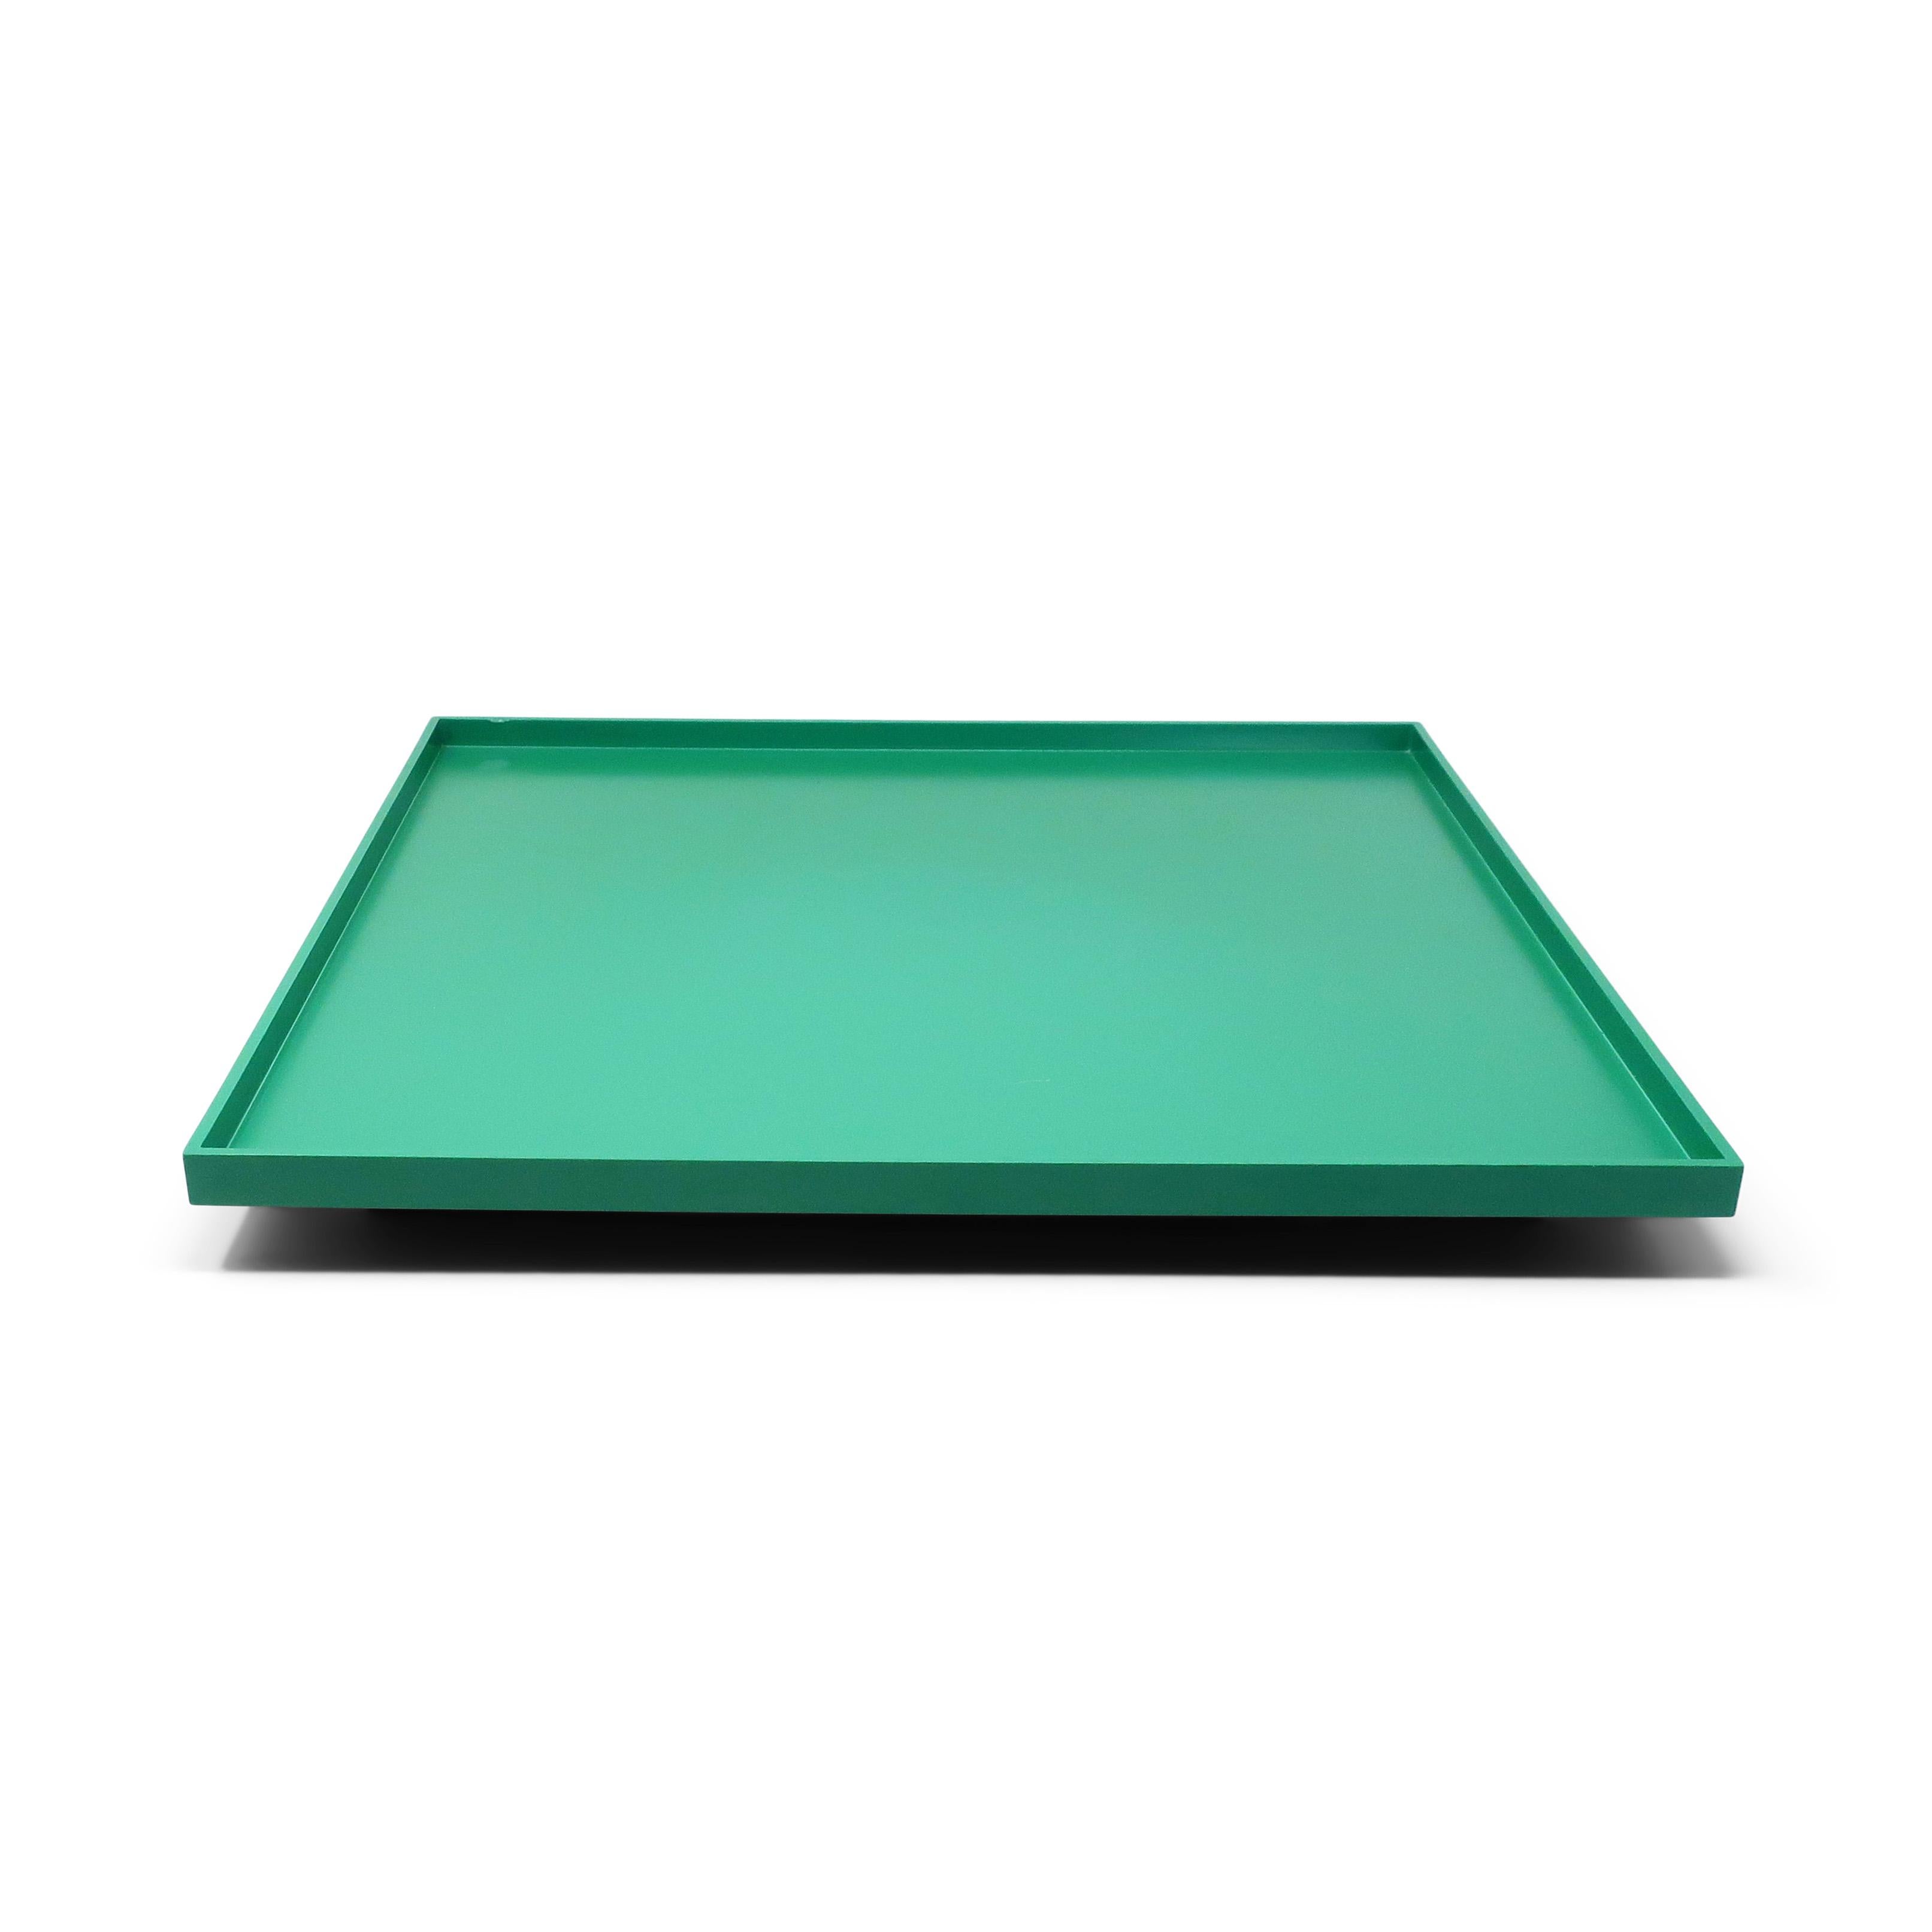 A classic design by Memphis Milano-affiliated American postmodern designer and architect Michael Graves for his Euclid line for Alessi, the Italian home goods powerhouse. A green square tray sitting on blue rectangular feet.  The Euclid line's